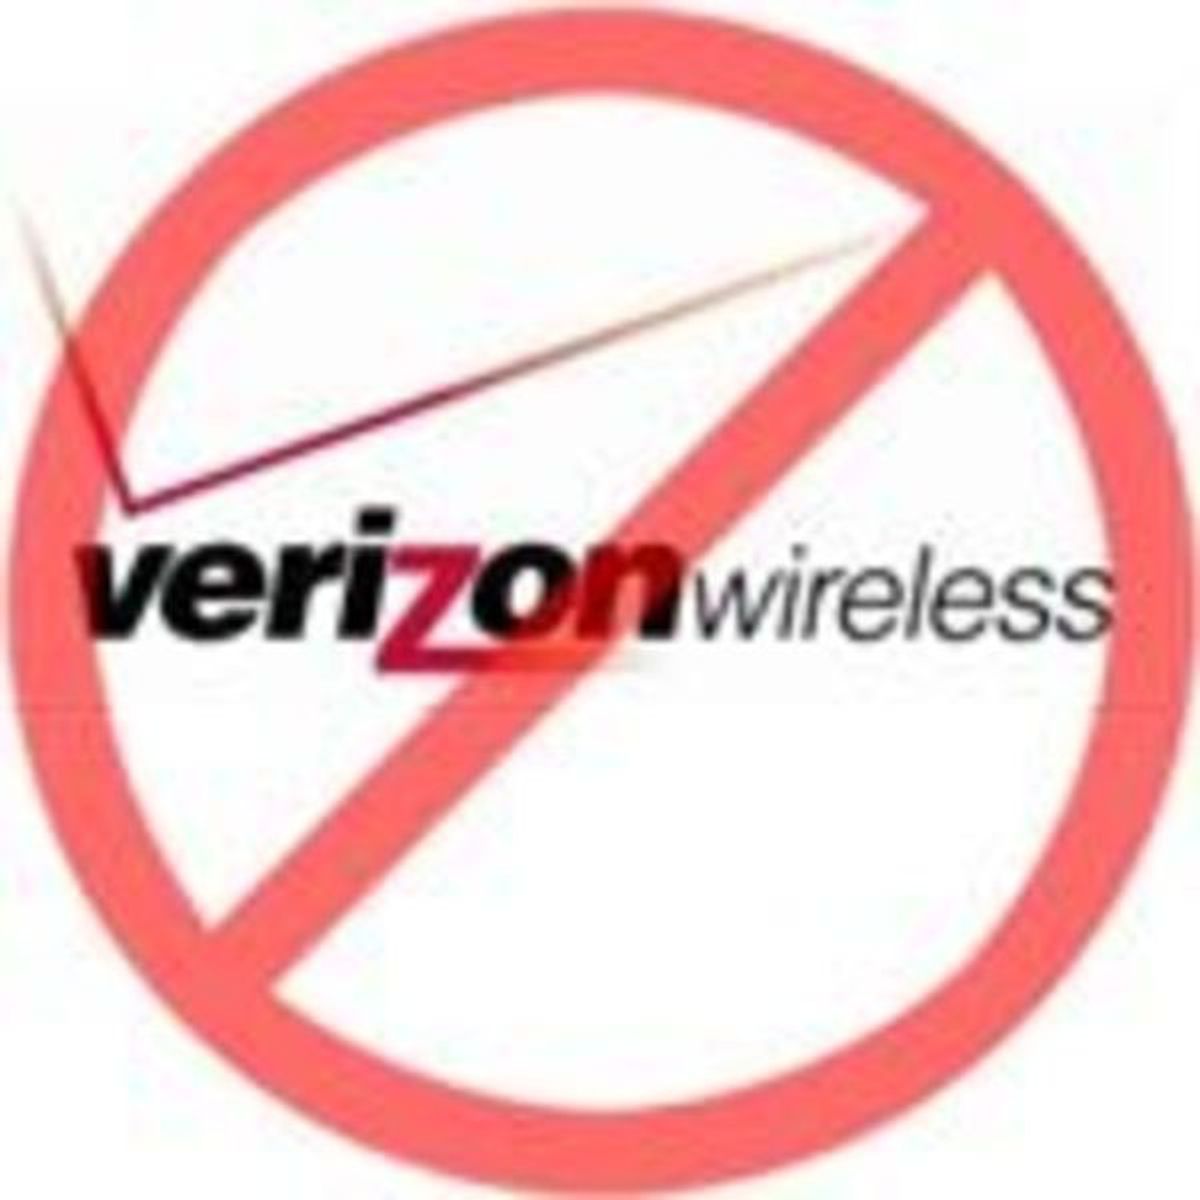 Five Things To Do While Waiting On Verizon's Customer Service